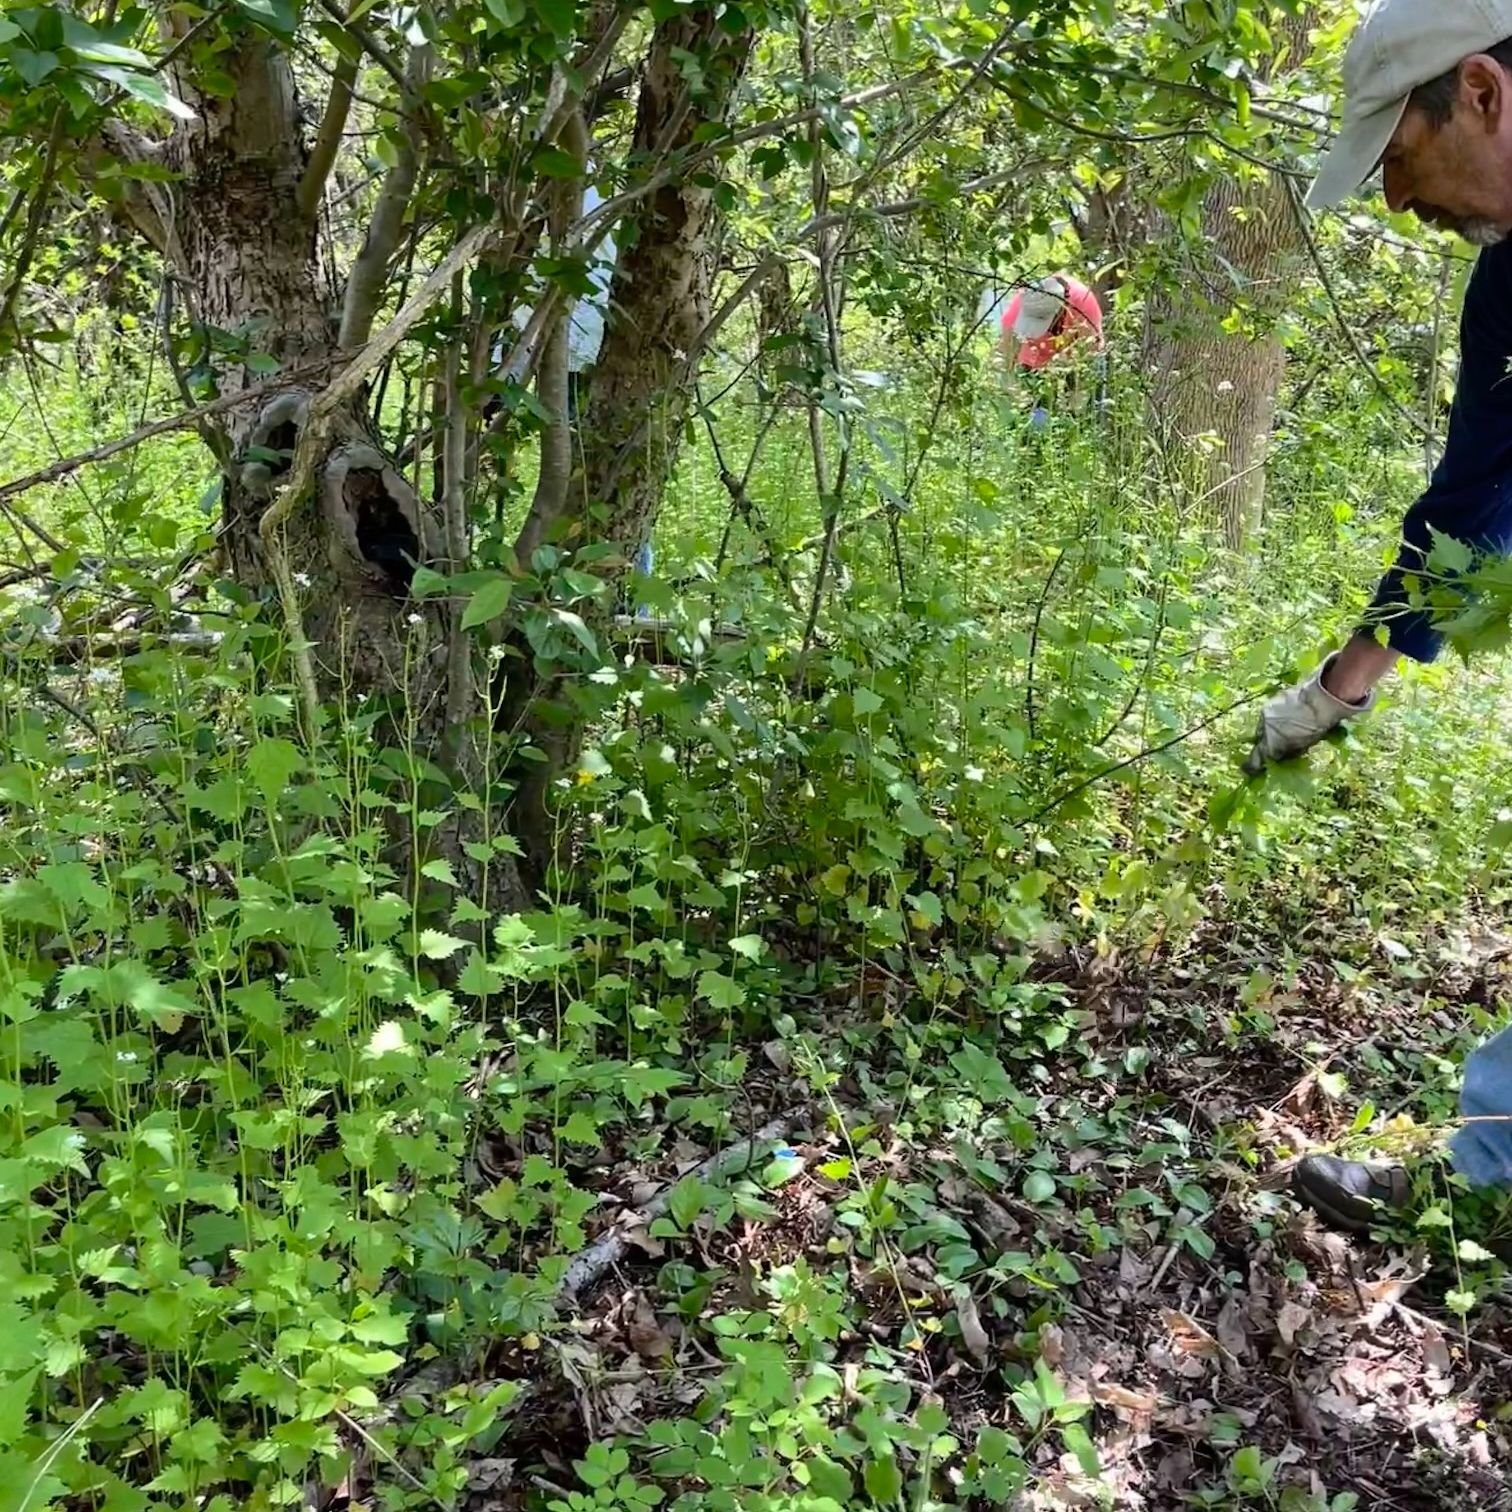 Garlic mustard's worst nightmare: volunteers motivated by ice cream! 🌿🍦

This week, VolunTuesday returned to Willow Brook Farm, where our trusty volunteers removed garlic mustard from the field edges. Garlic mustard is an invasive plant that displa